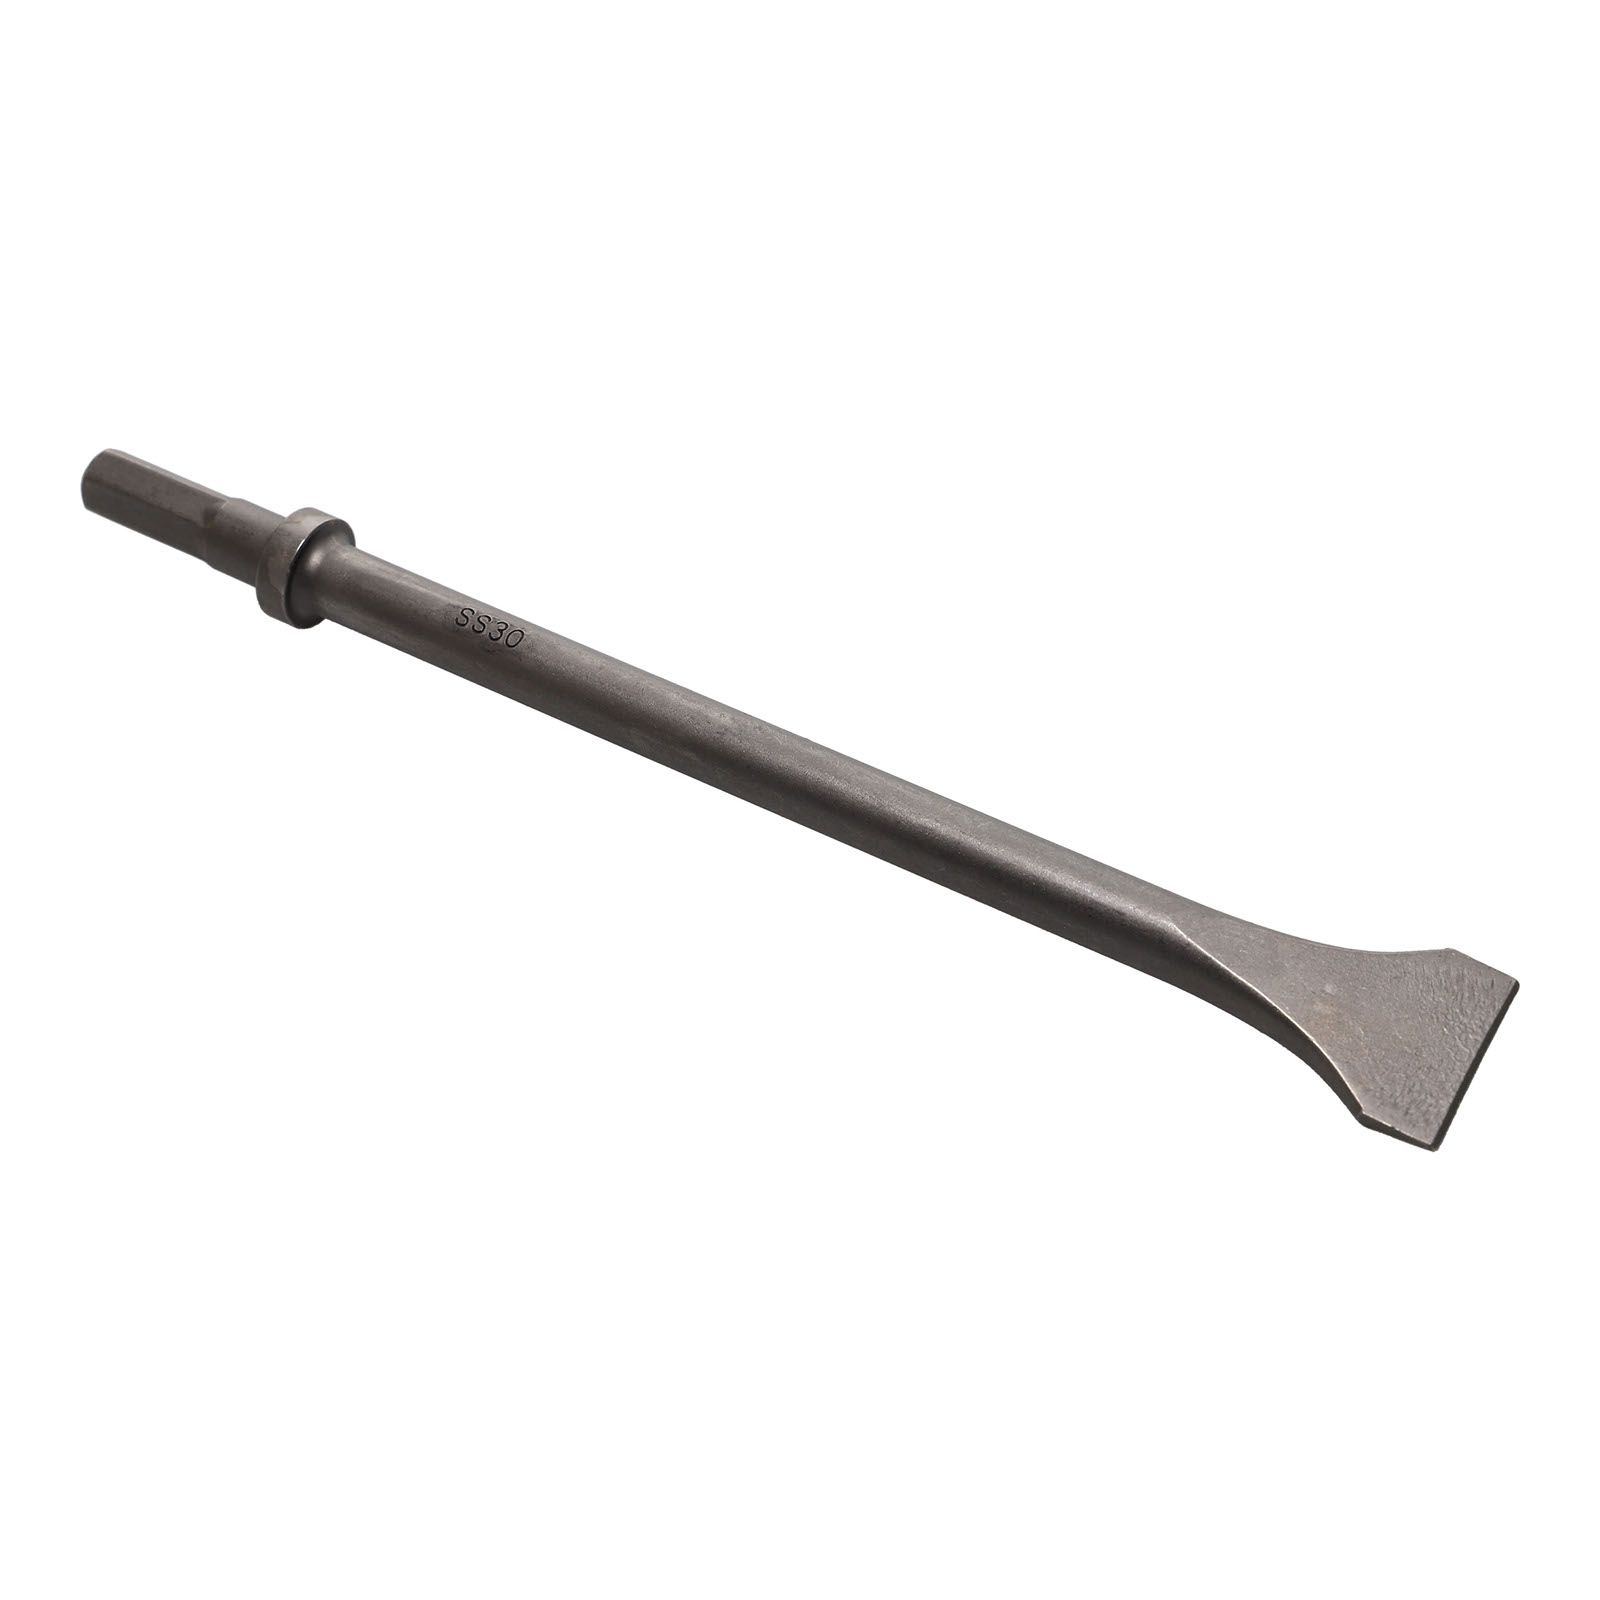 CHISEL 11MM HEX SHANK 205x30MM SS30 product photo